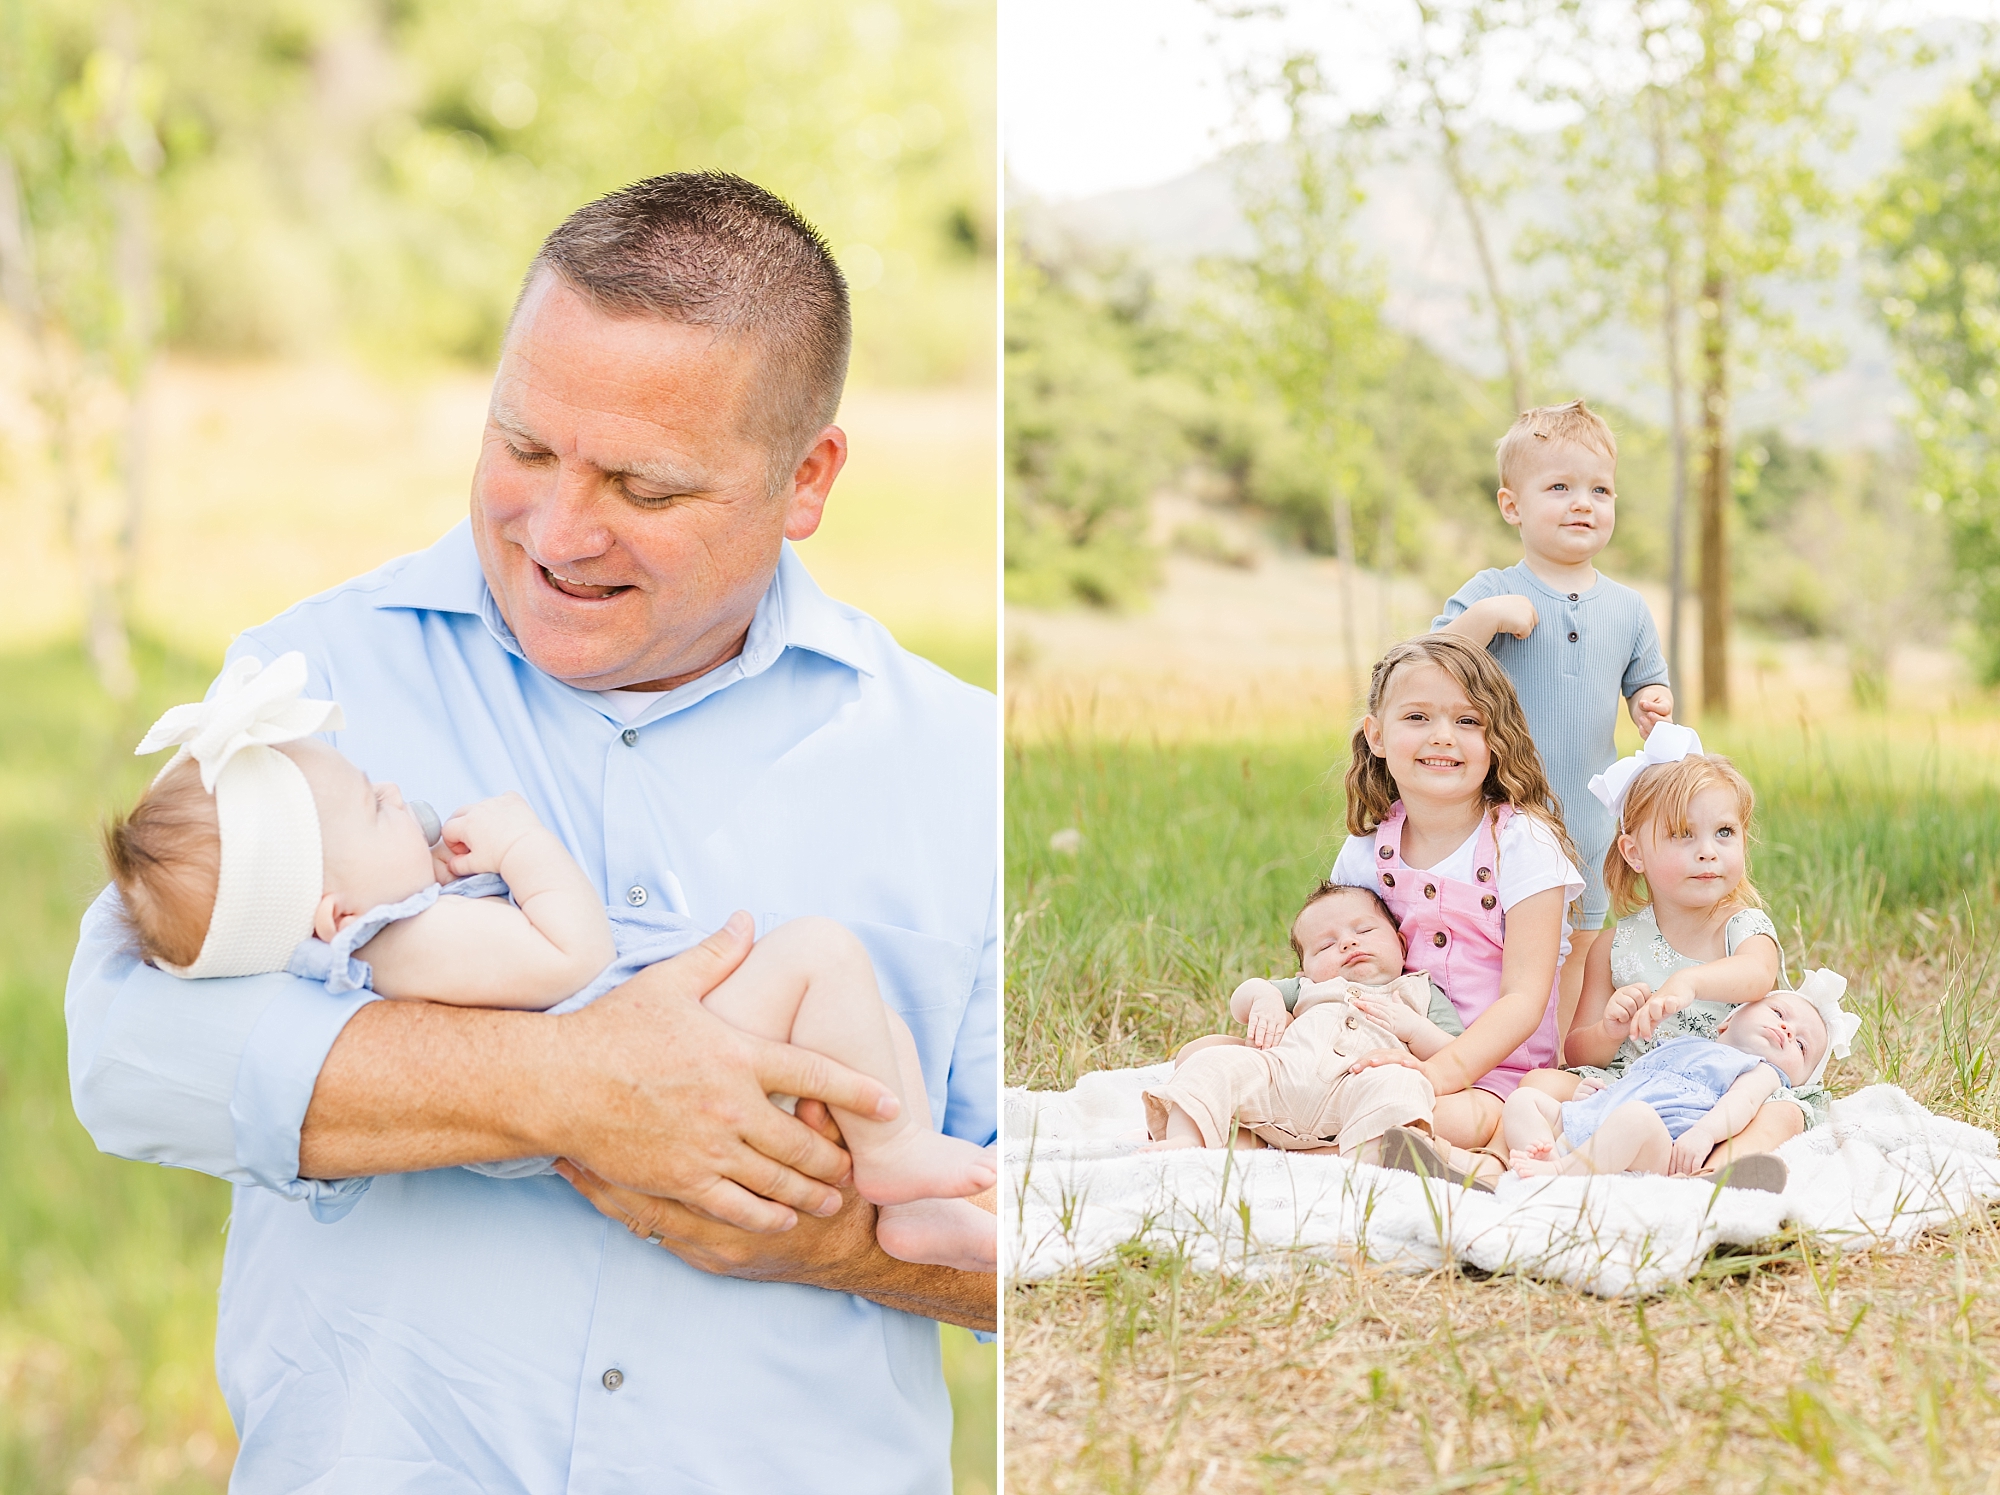 Creating the "Light" and "Airy" look for your family photo sesion